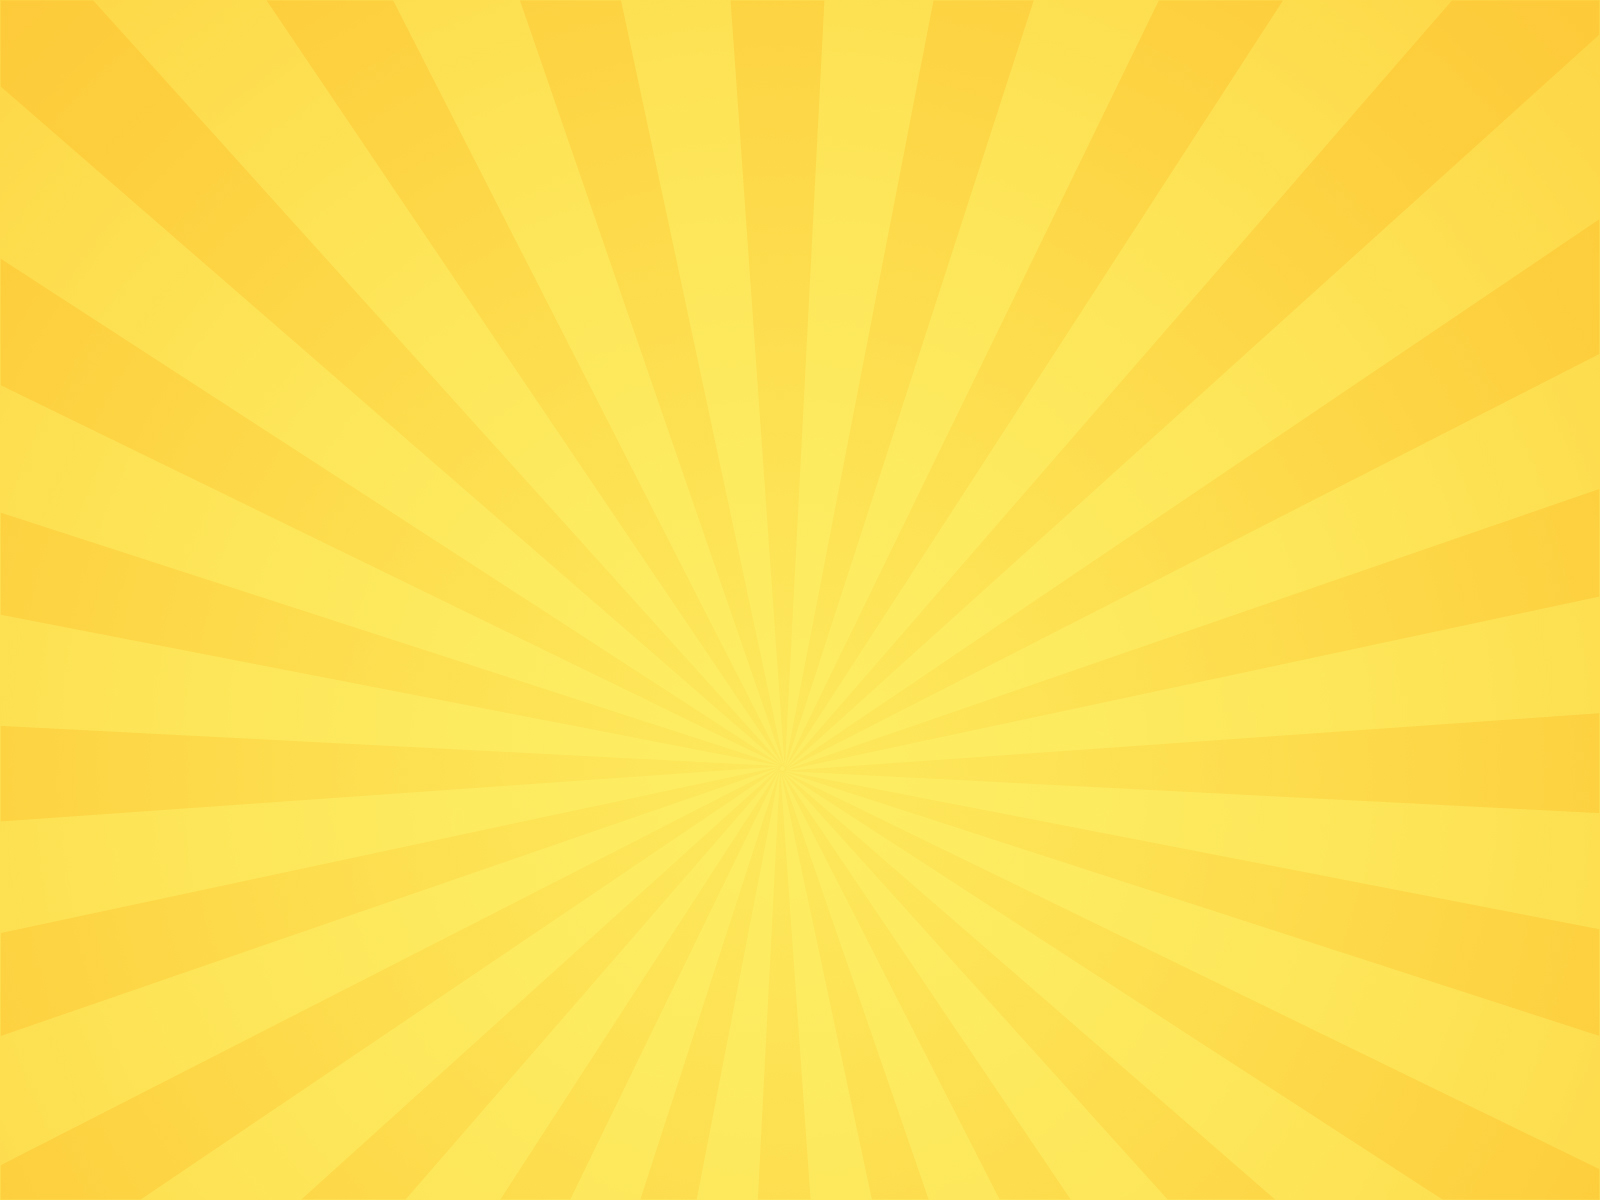 Yellow Background Image Related Keywords Amp Suggestions